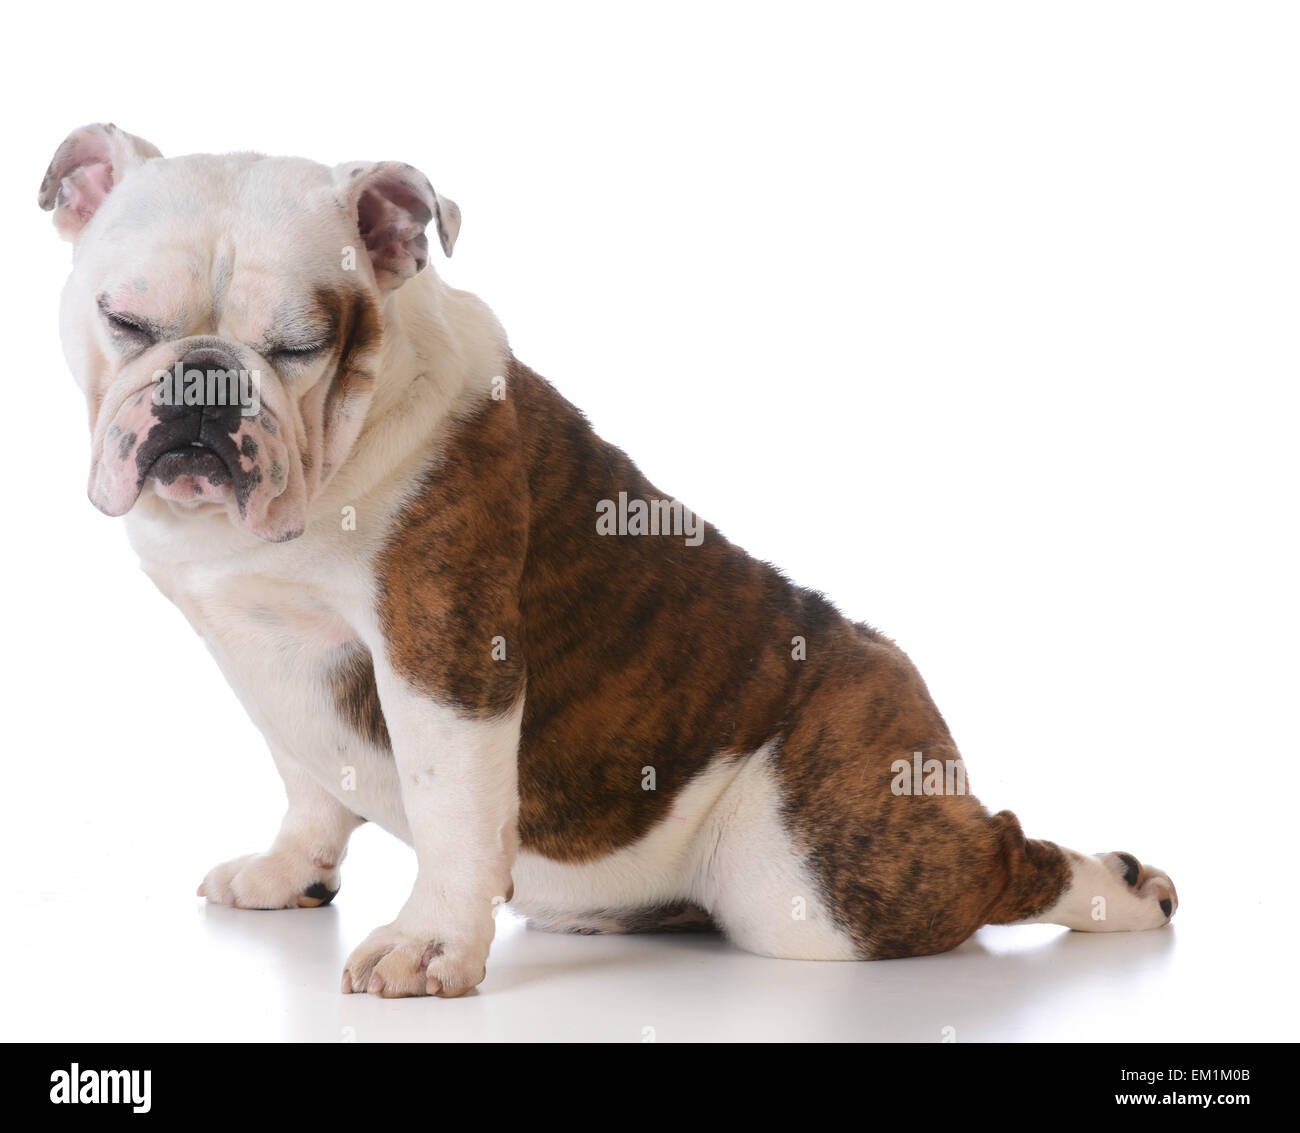 cute bulldog puppy sitting with back leg stretched out behind on white background Stock Photo